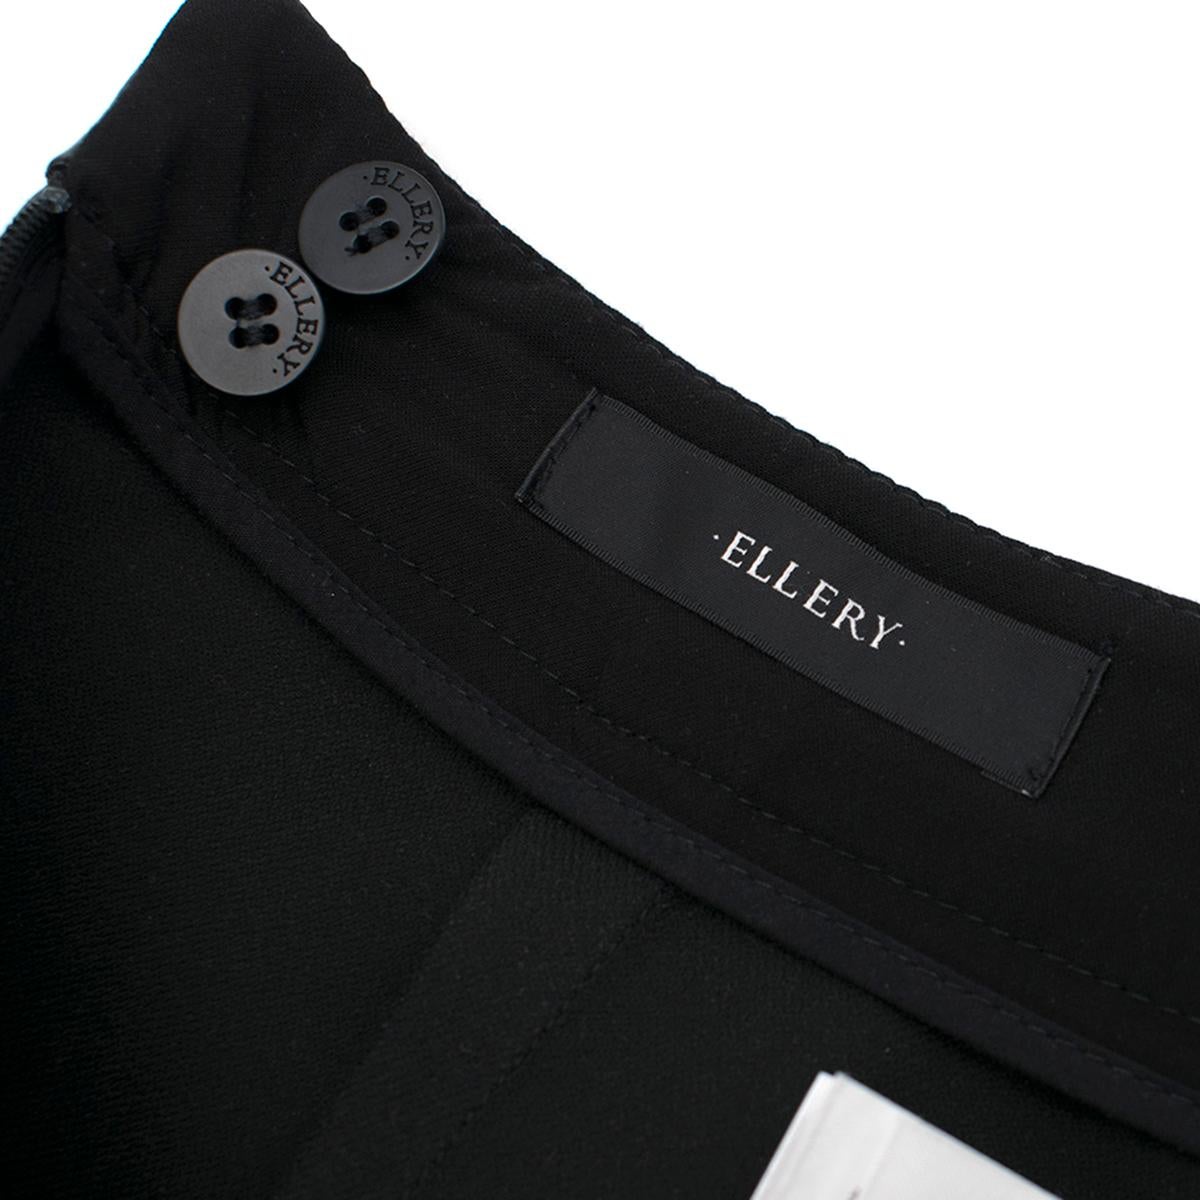 Ellery Milky Way Black Mini Skirt - Size US 4 In Excellent Condition For Sale In London, GB